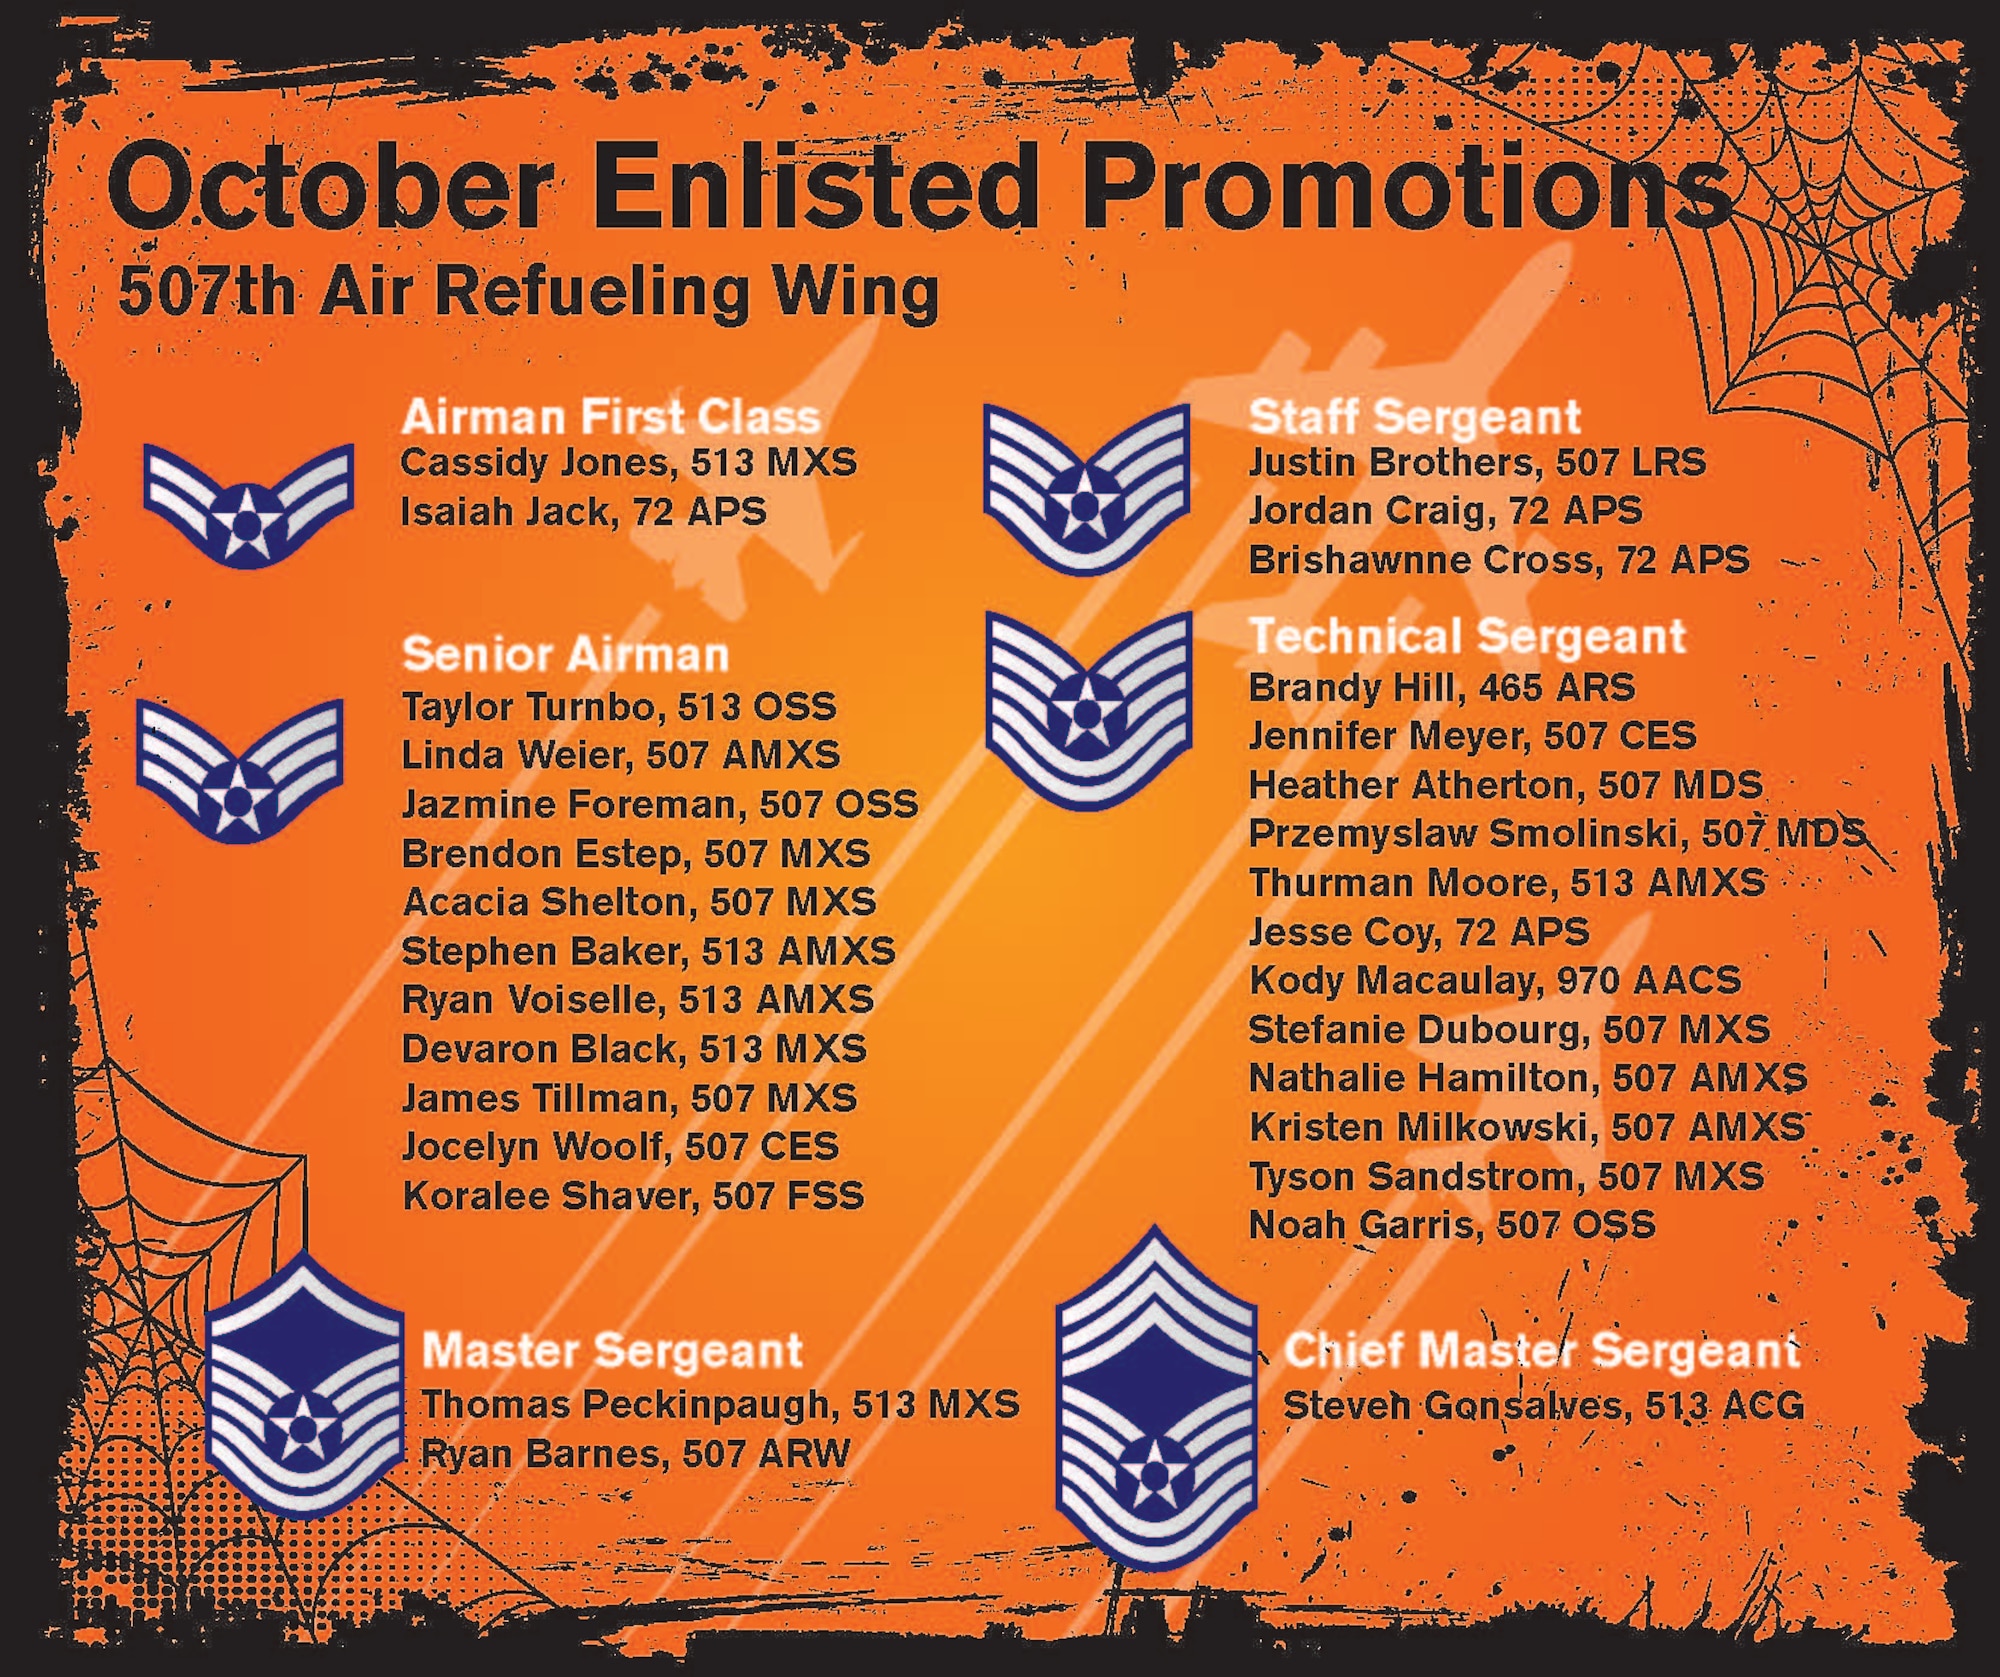 A graphic of promotions for the month of October.